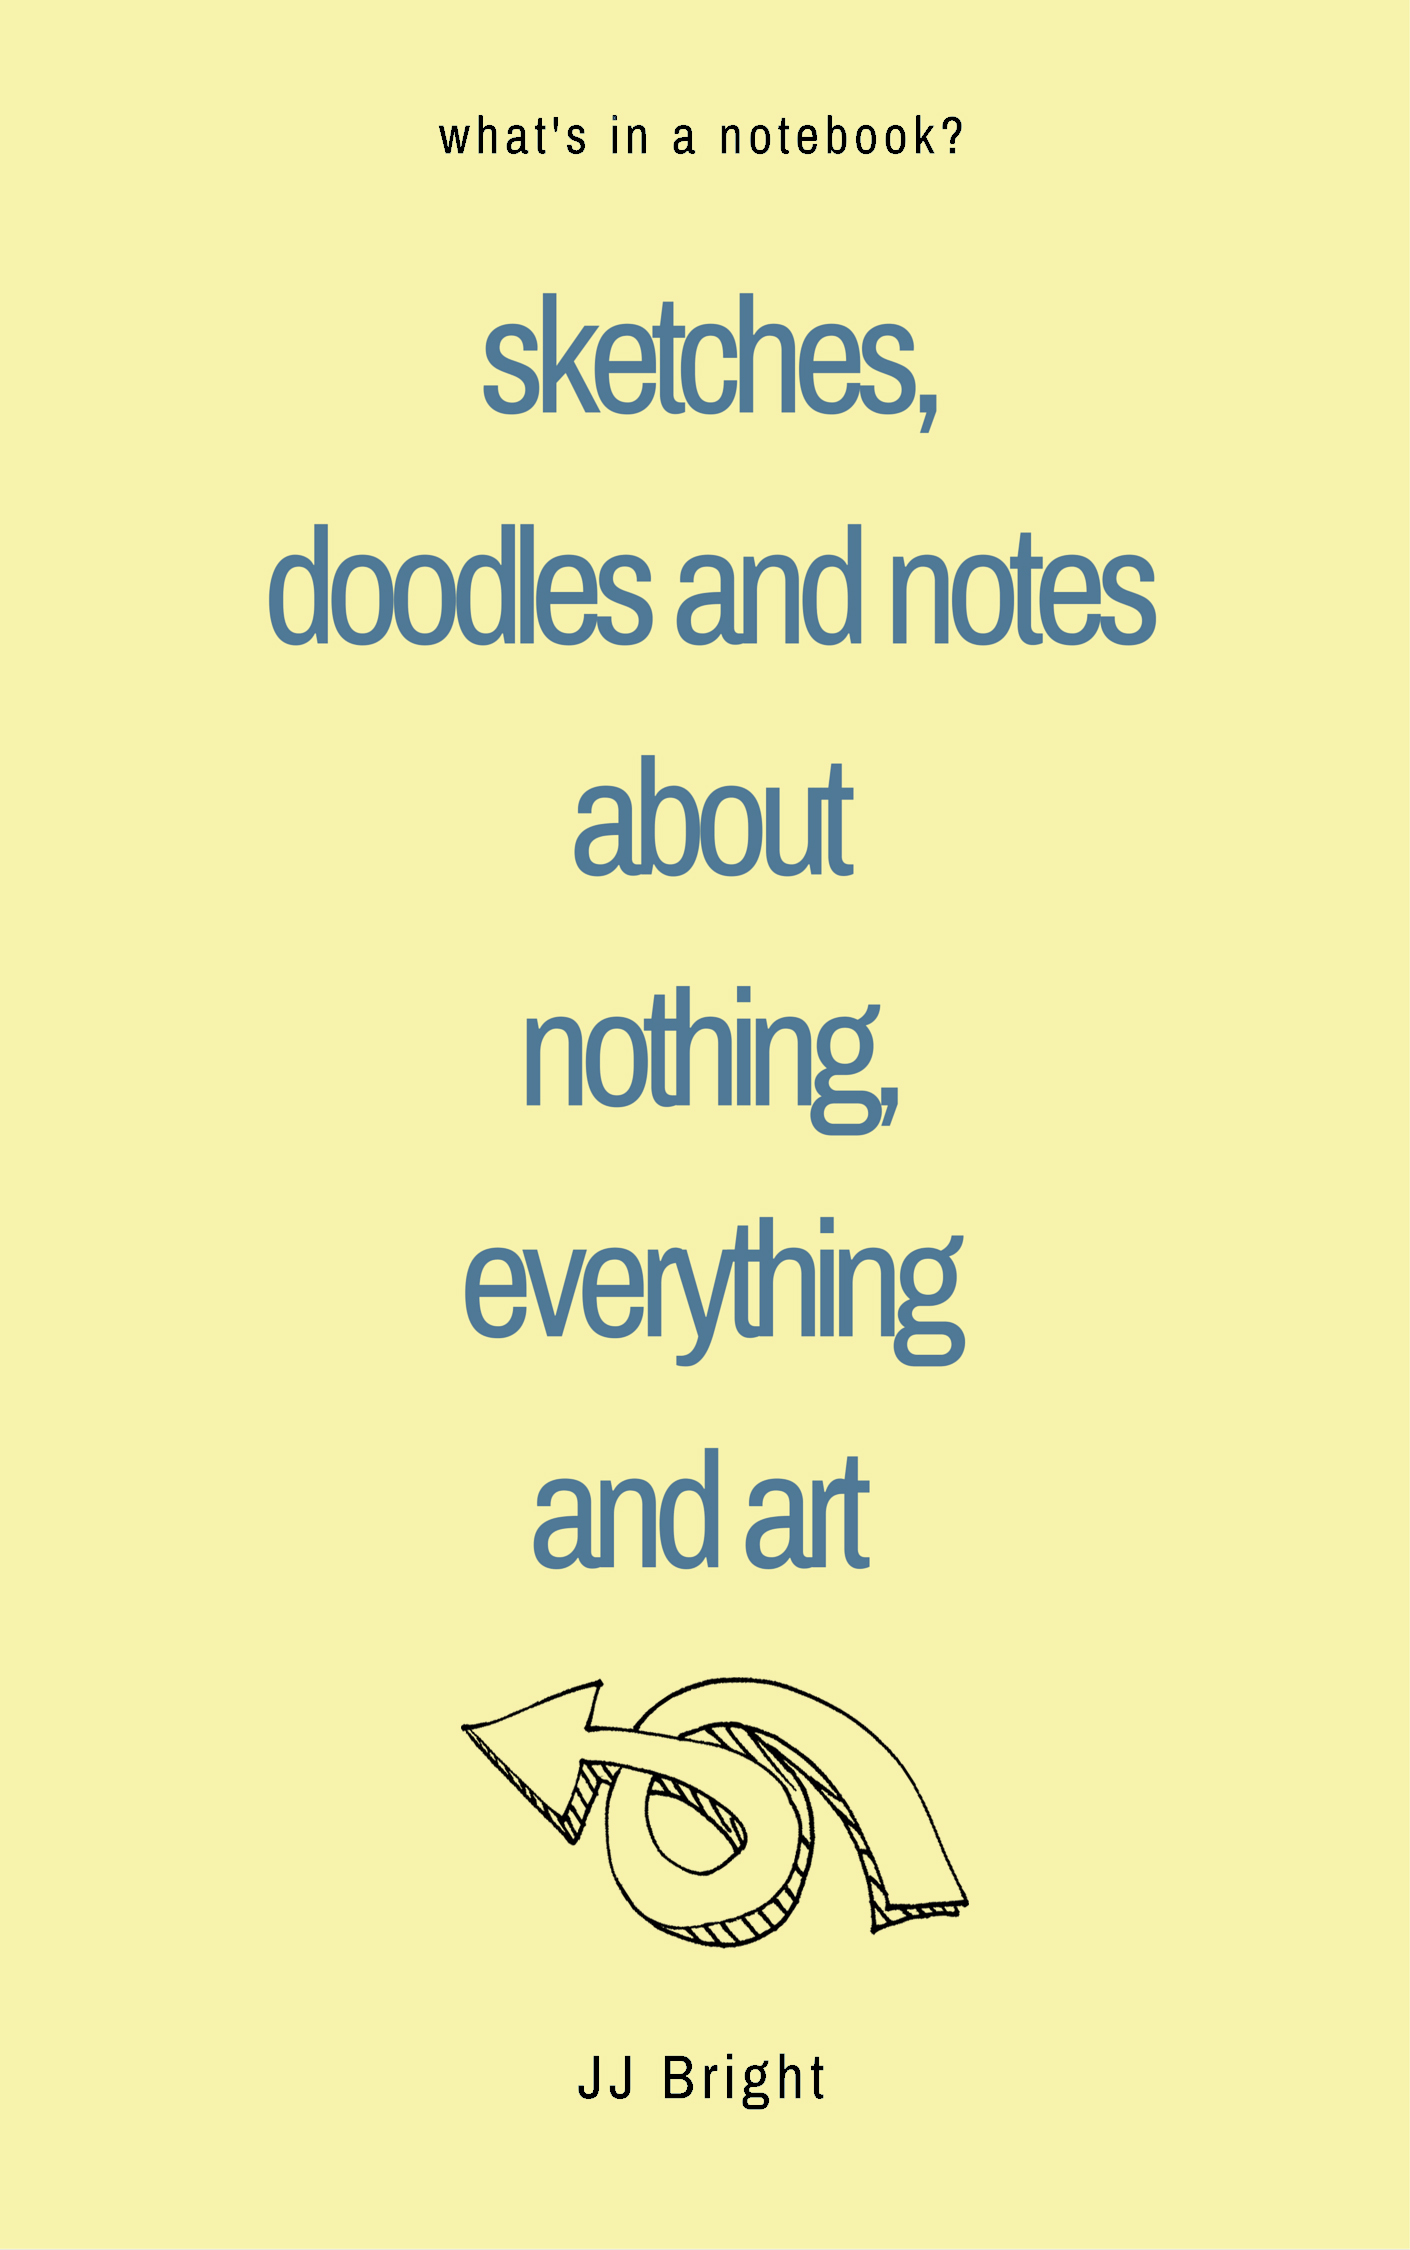 Keeping a Notebook. Sketches, Doodles and Notes about Nothing, Everything and Art